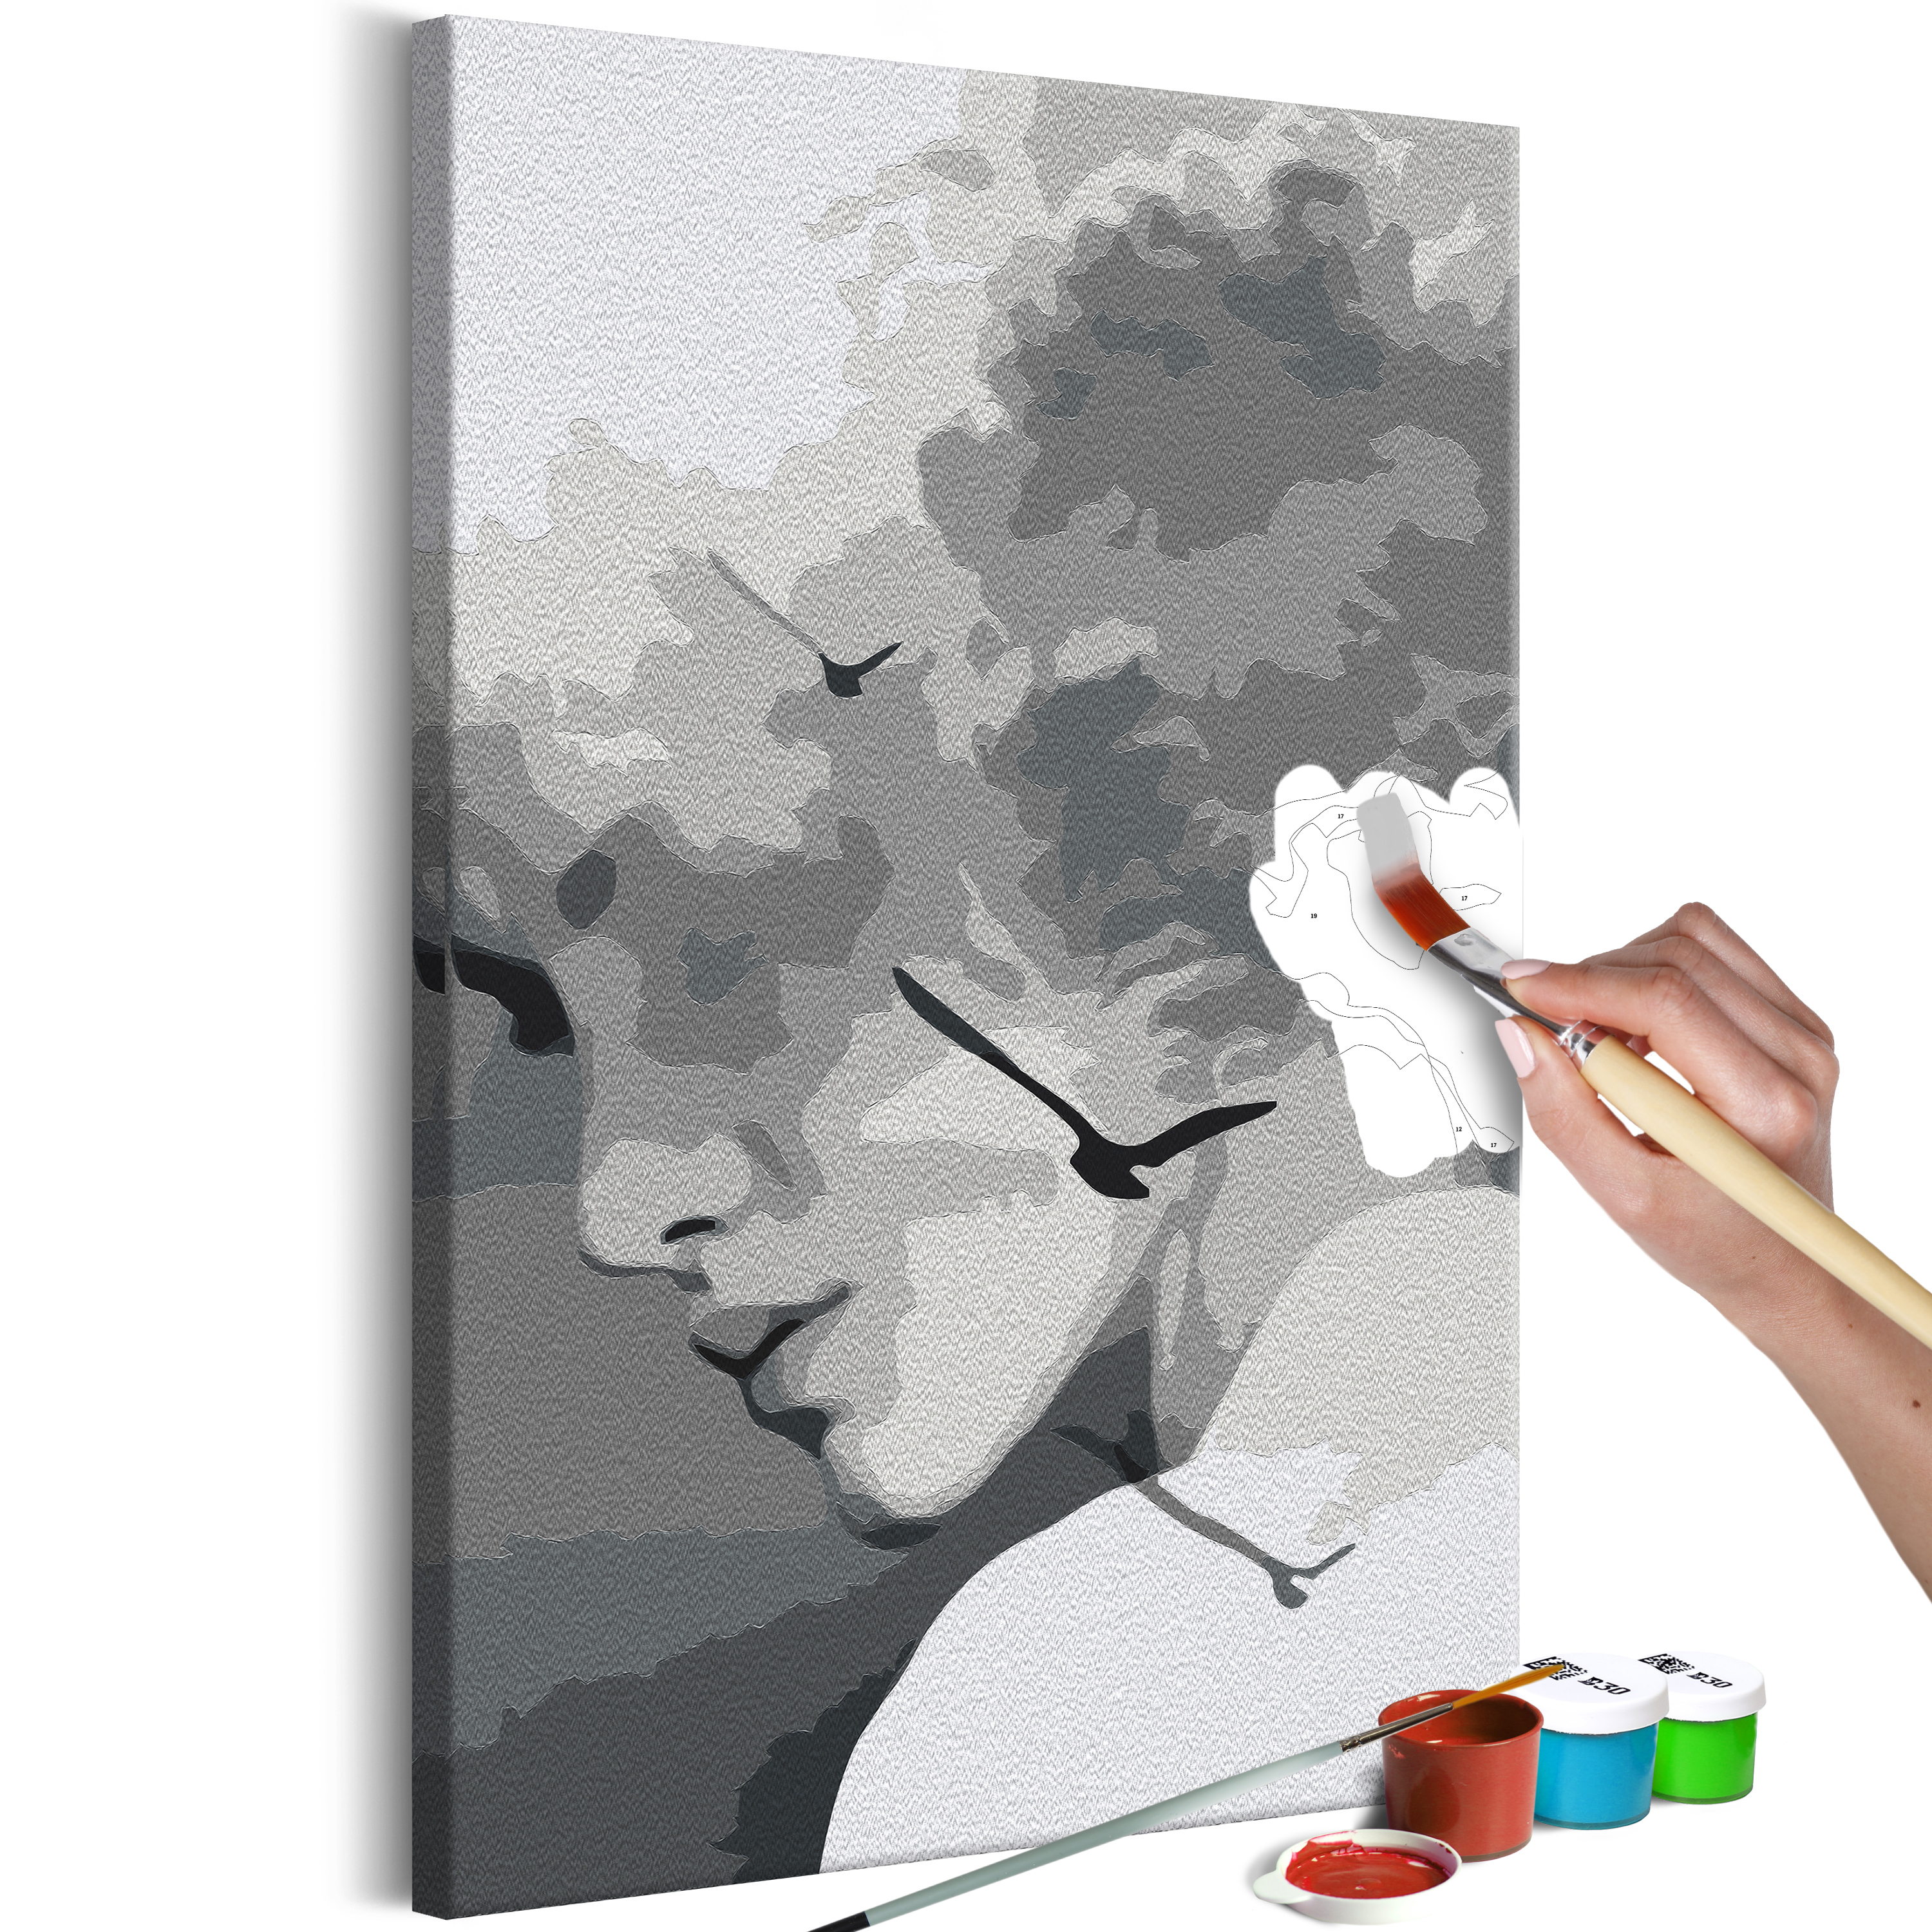 DIY canvas painting - Woman and Birds - 40x60